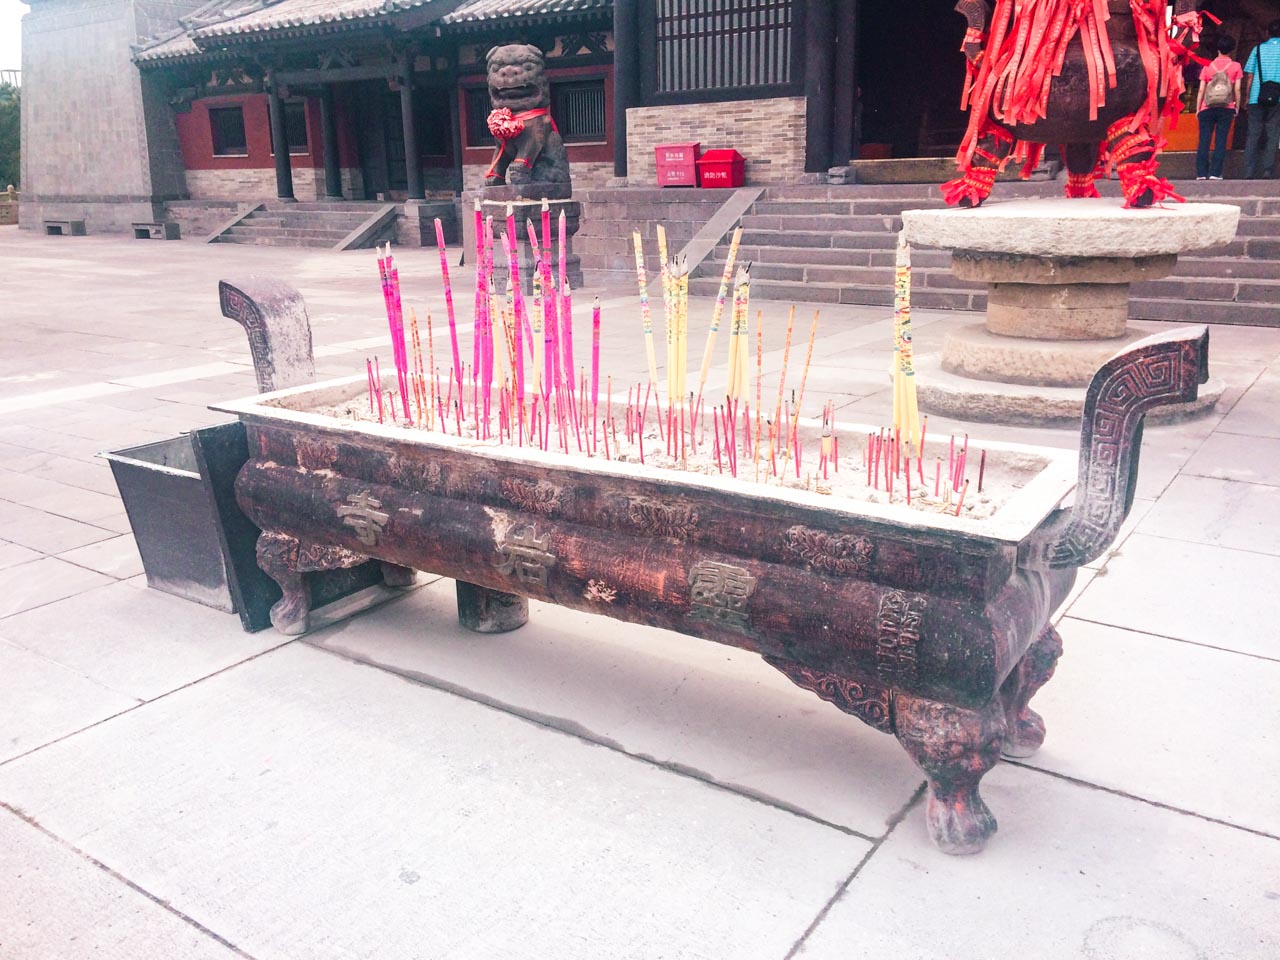 Burning incense (joss) sticks outside the Lingyan Temple near the Yungang Grottoes in Datong, Shanxi